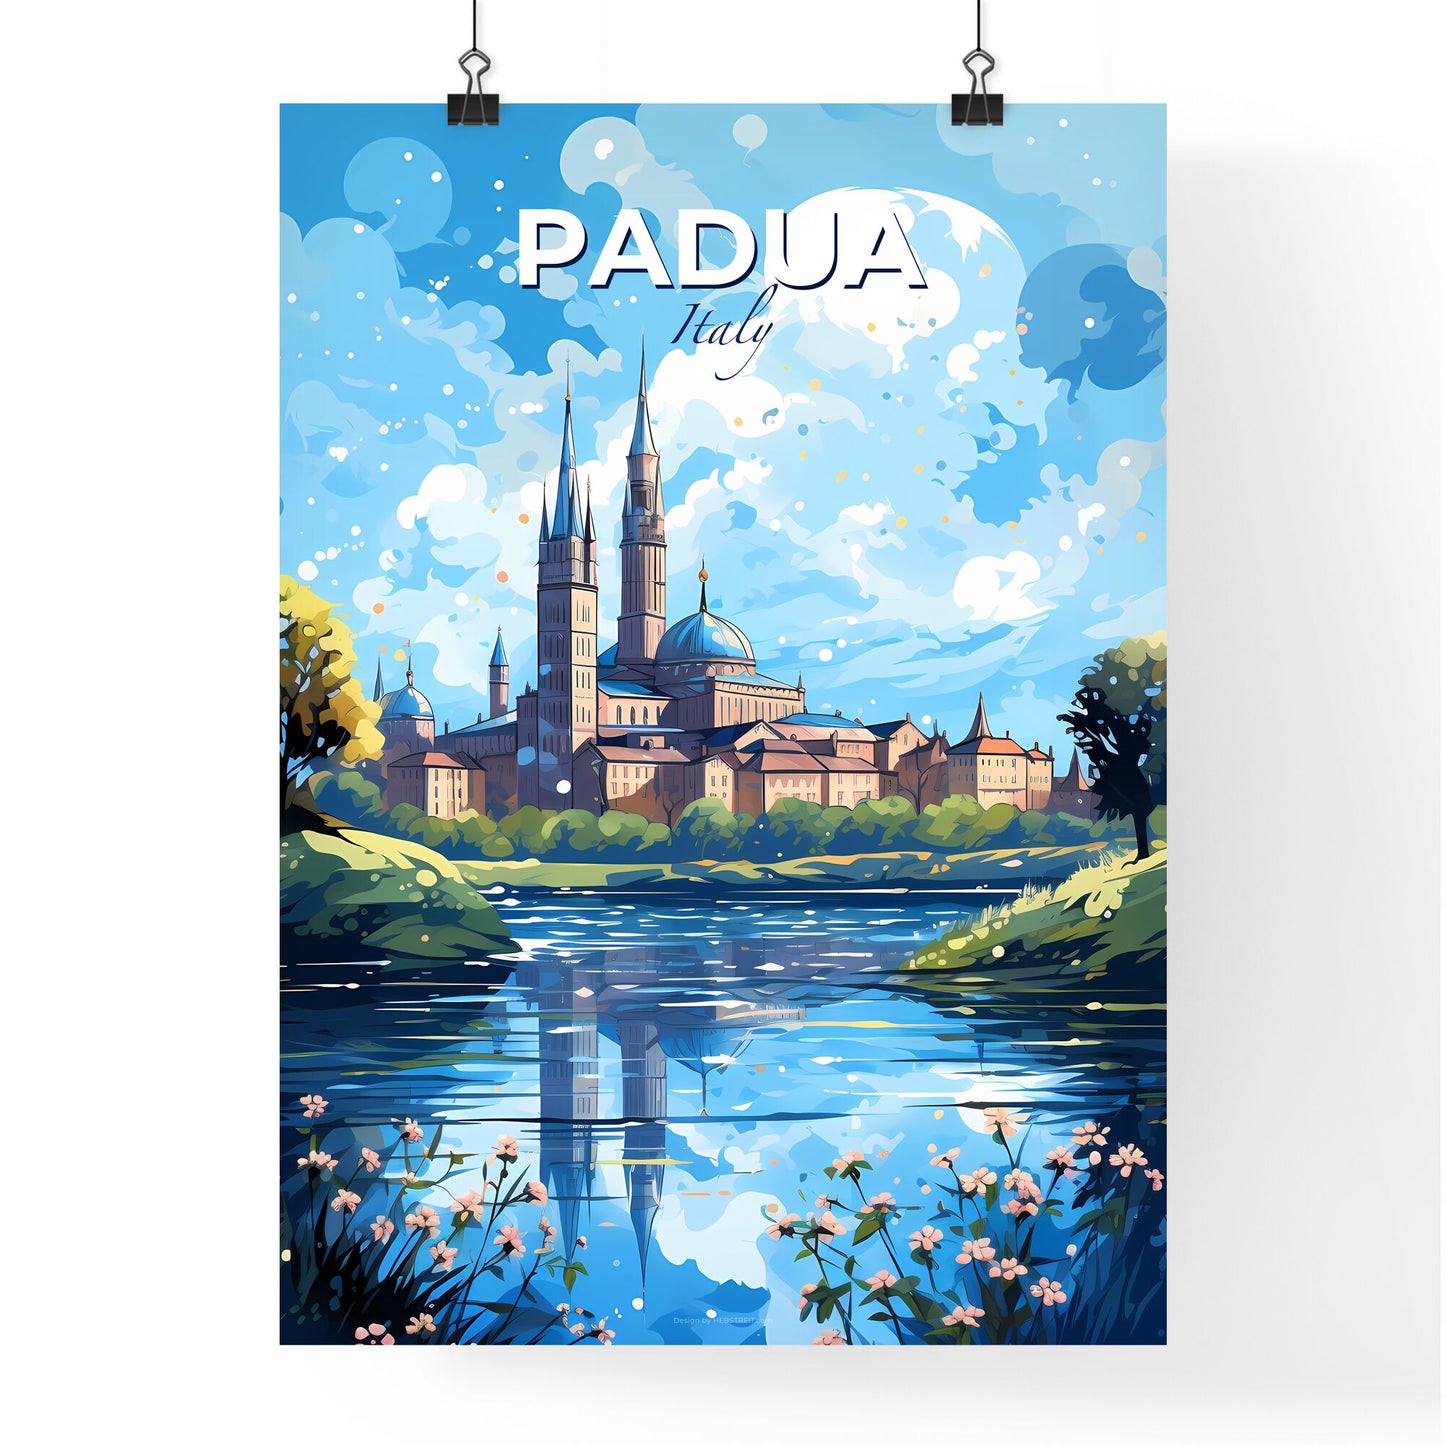 Padua Italy Skyline - A Castle By A Lake - Customizable Travel Gift Default Title